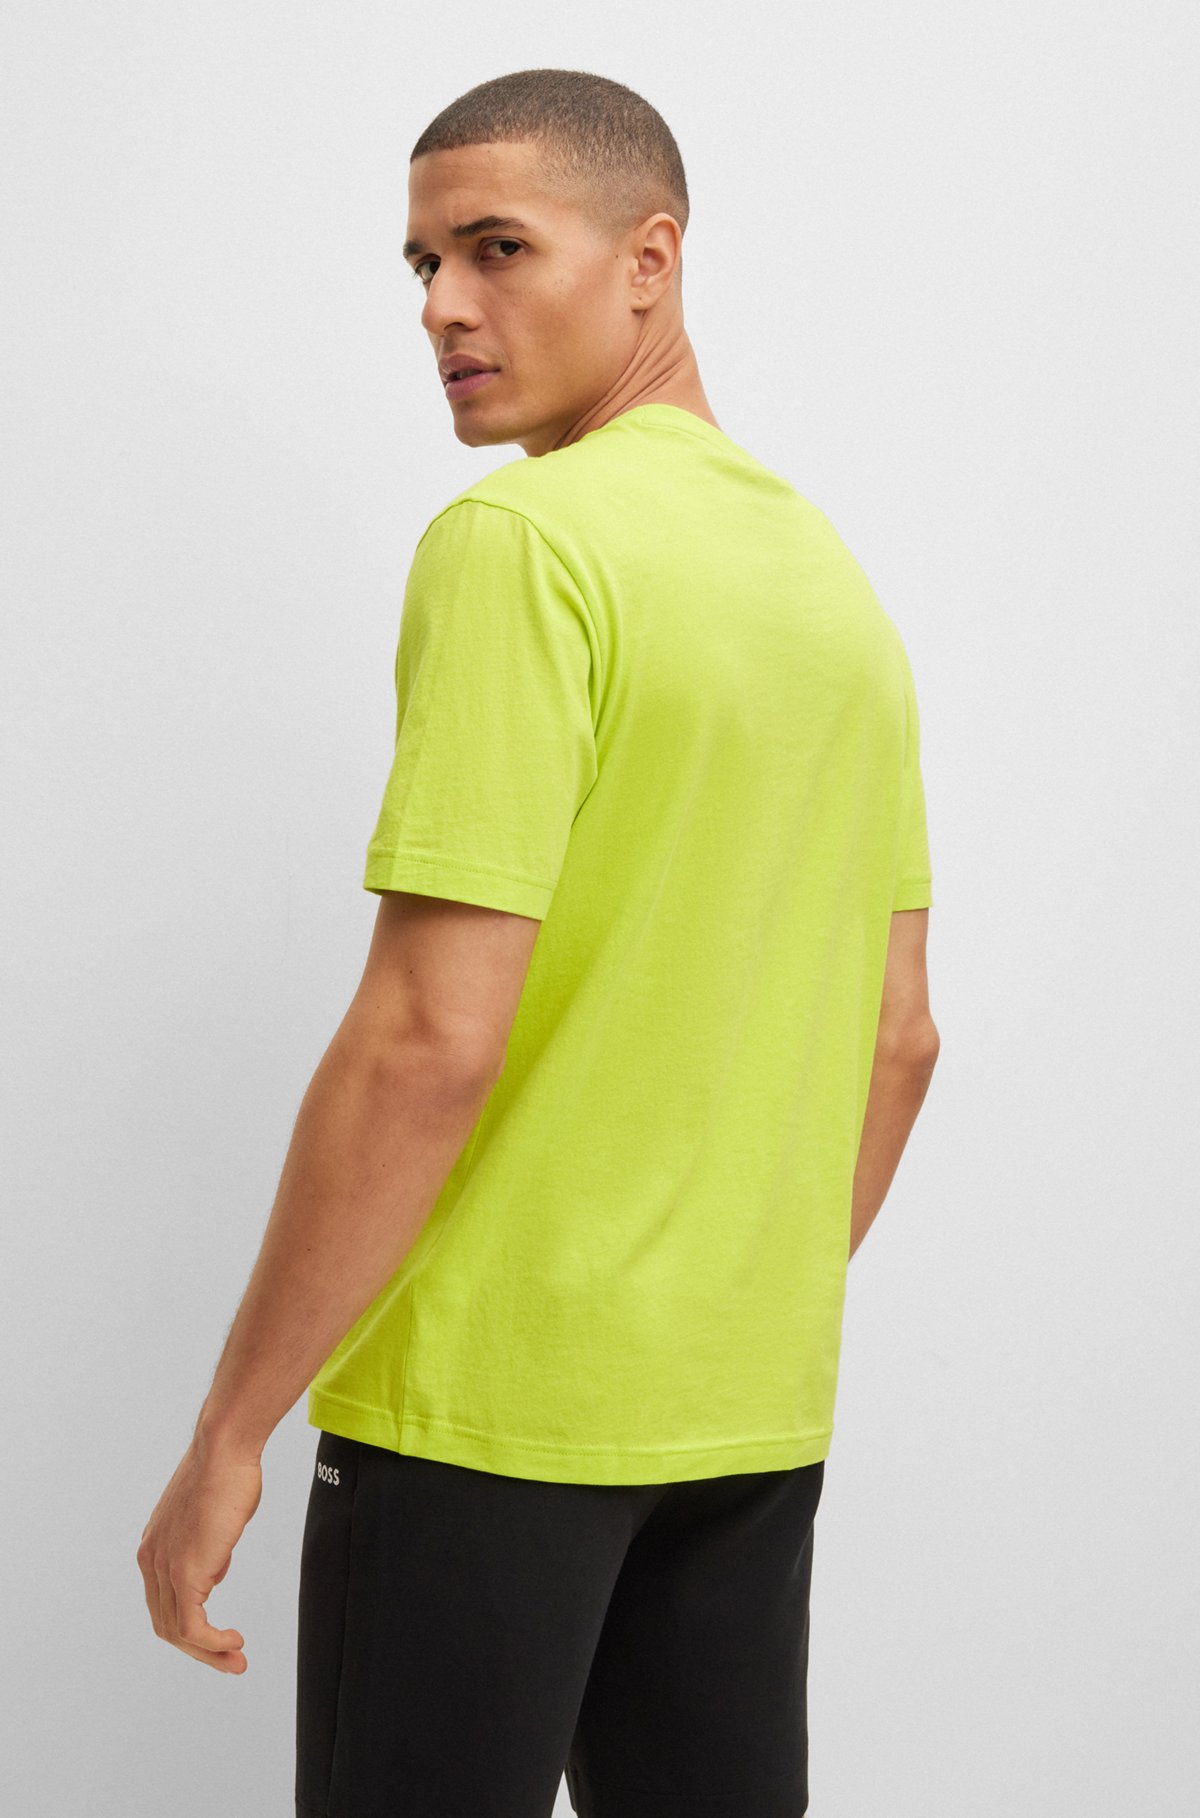 Crew-neck T-shirt in cotton with multi-colored logos, Green